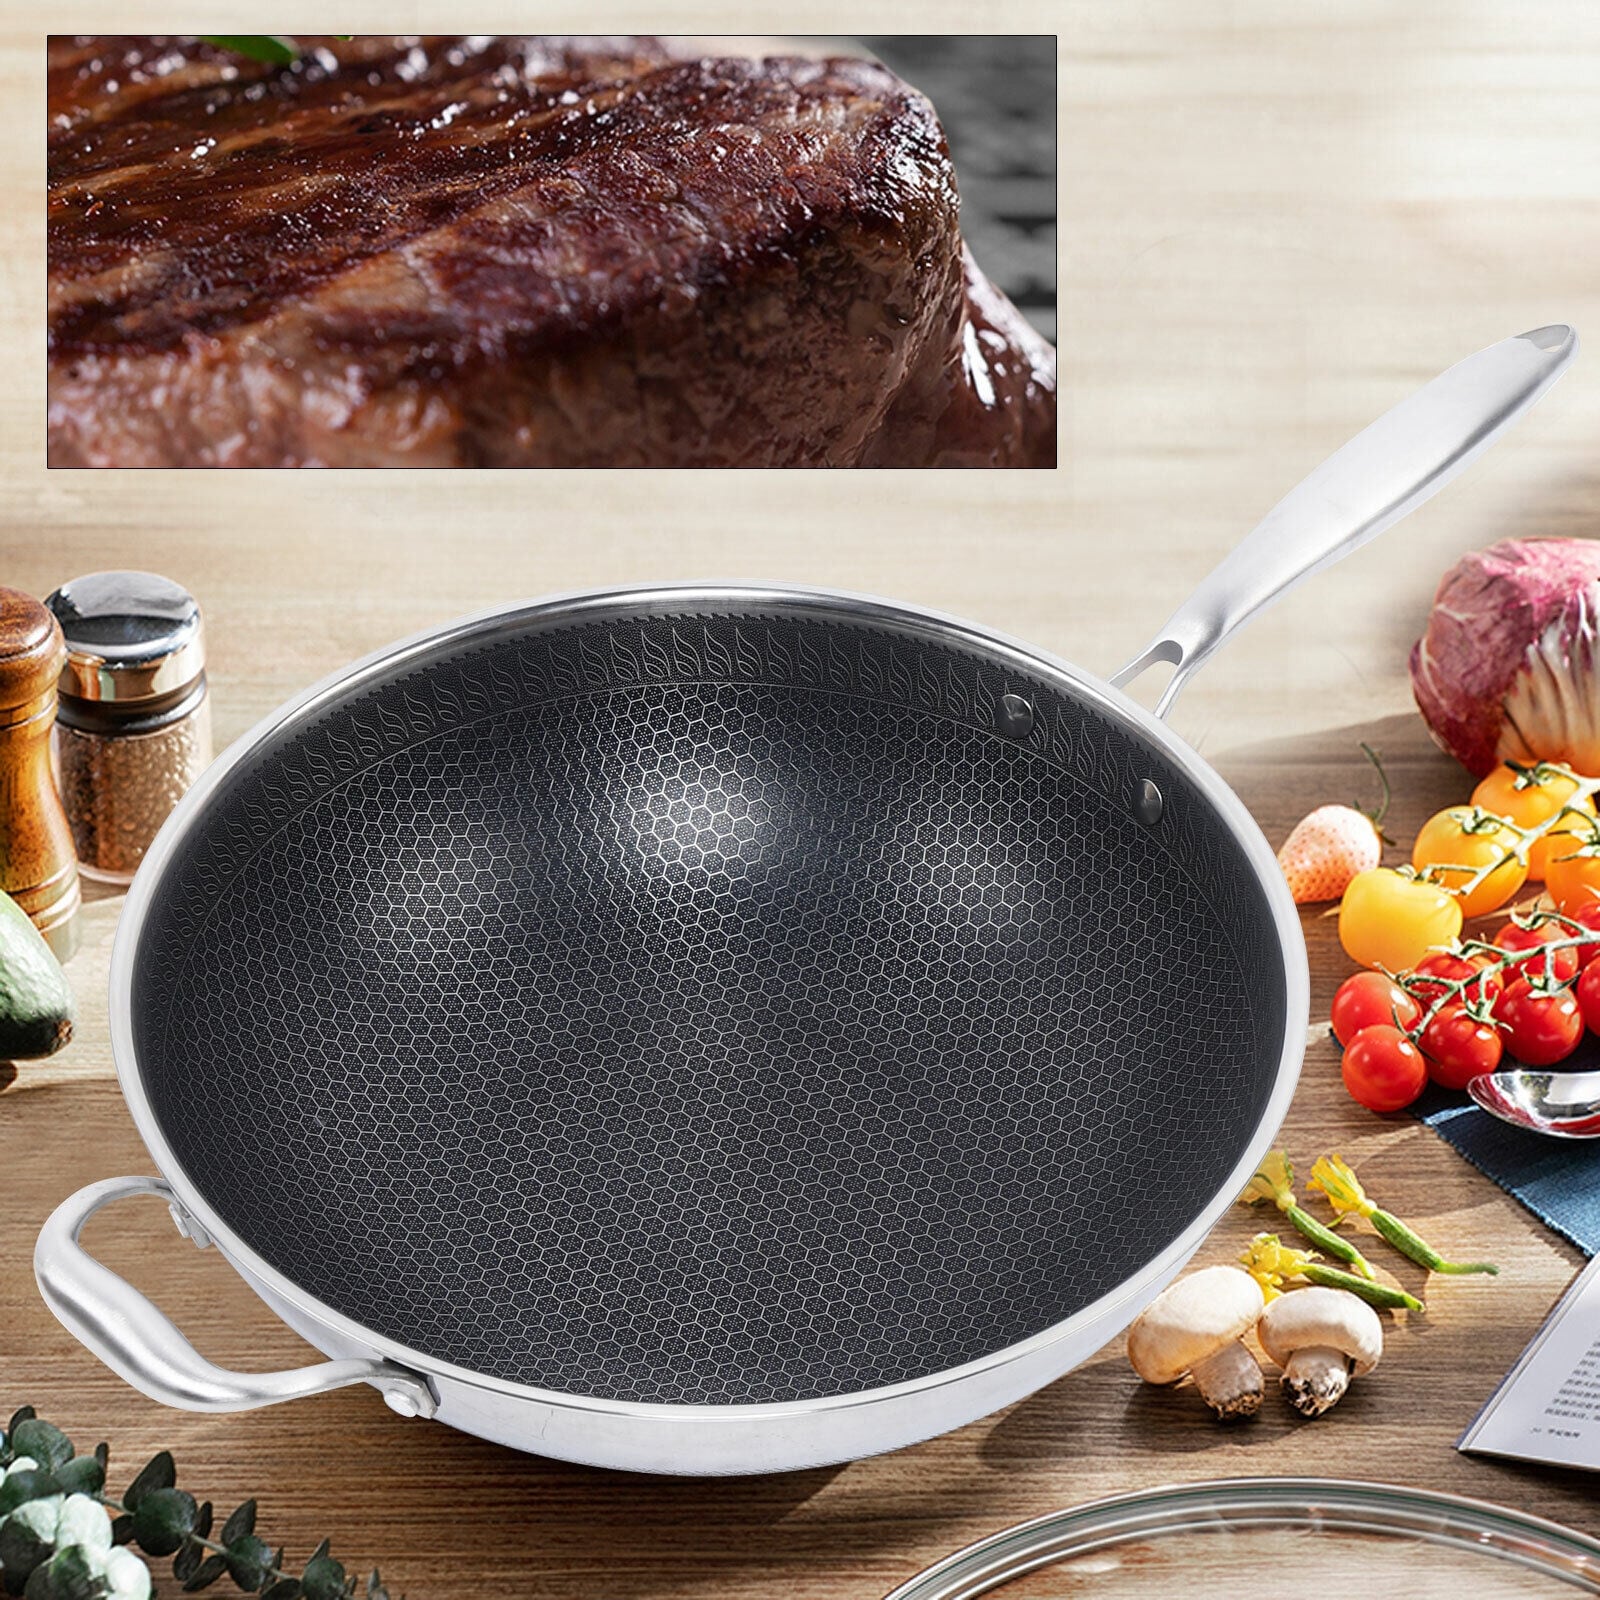 https://ak1.ostkcdn.com/images/products/is/images/direct/a39bc263503b4f7eb0cc6c356065a44c4e40564c/14-Inch-Stainless-Steel-Wok-Honeycomb-Frying-Pan-With-Glass-Lid.jpg